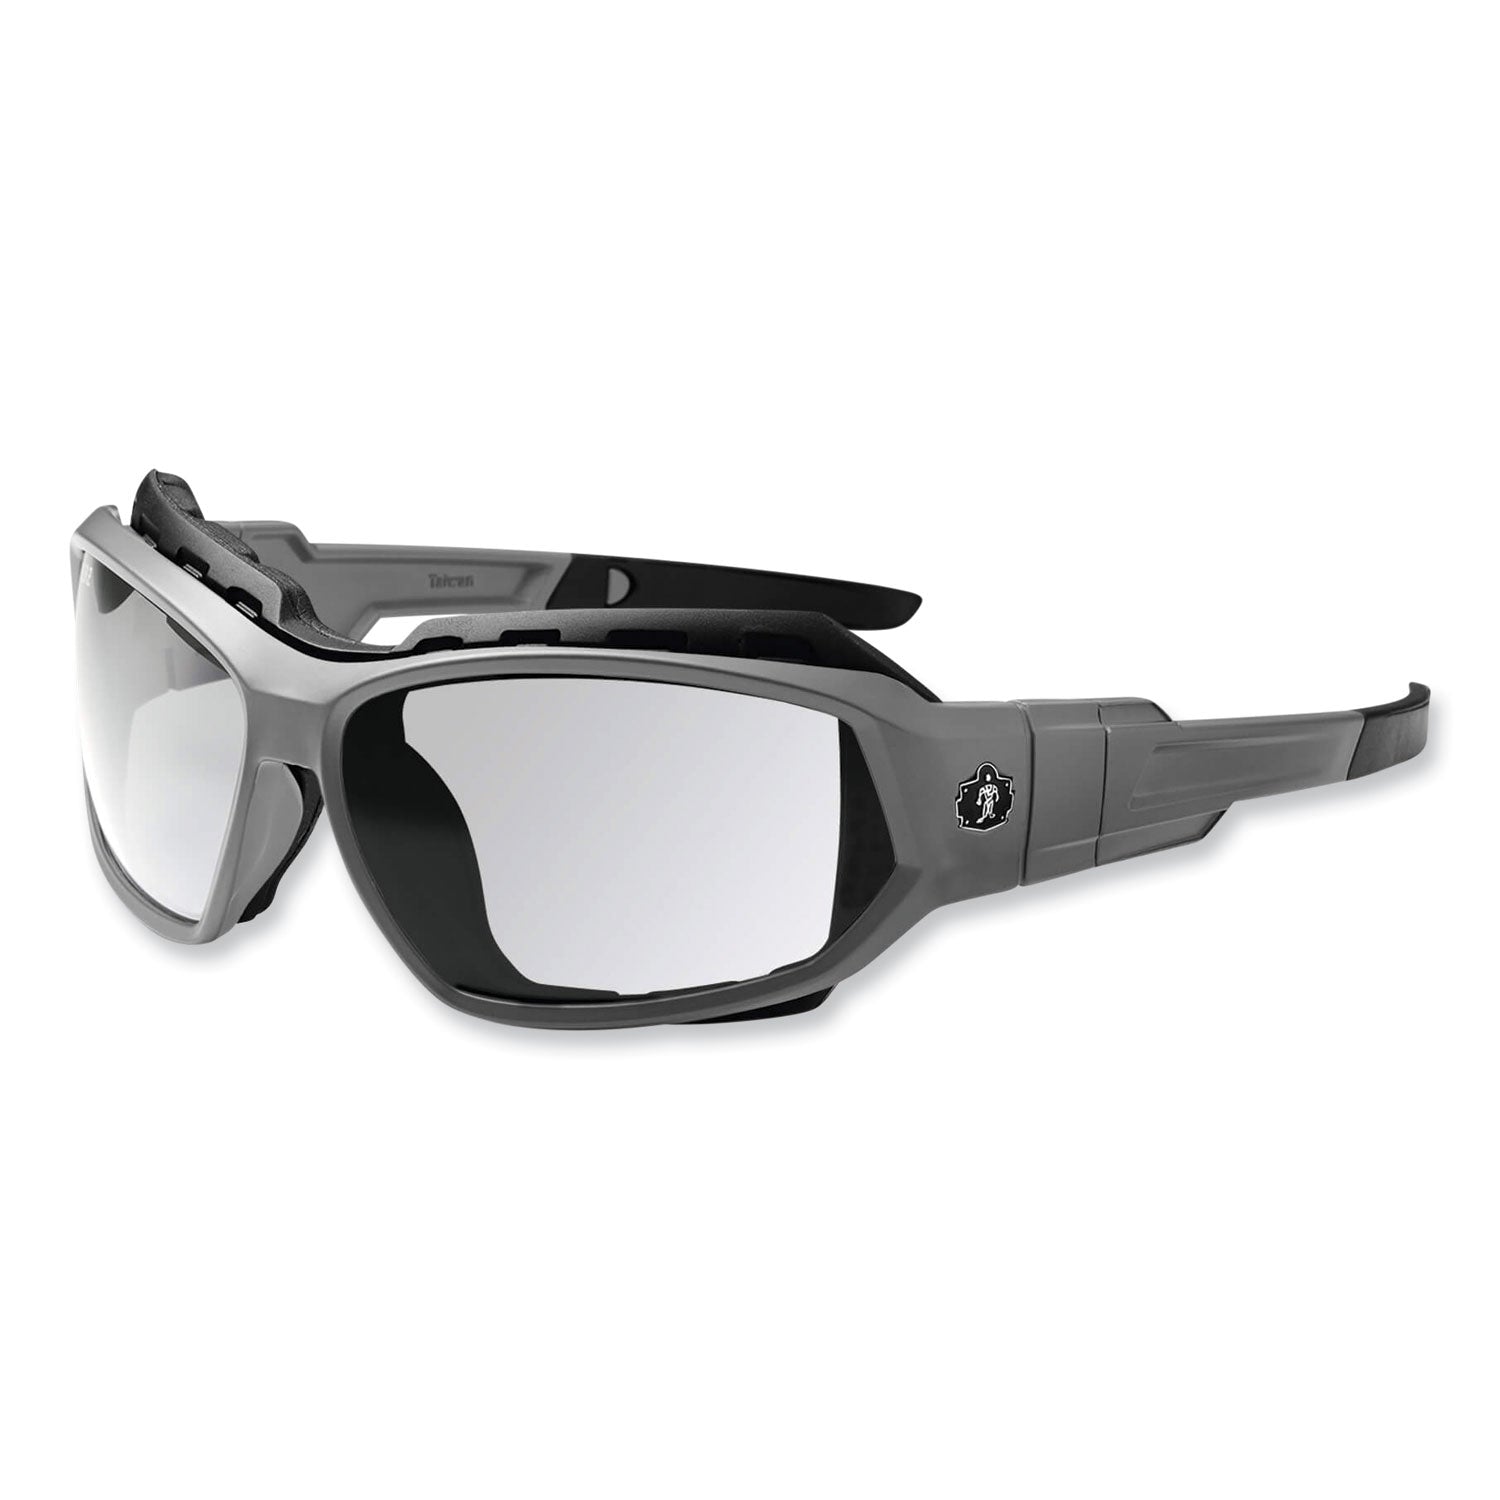 skullerz-loki-safety-glasses-goggles-matte-gray-nylon-impact-frame-clear-polycarbonate-lens-ships-in-1-3-business-days_ego56100 - 3